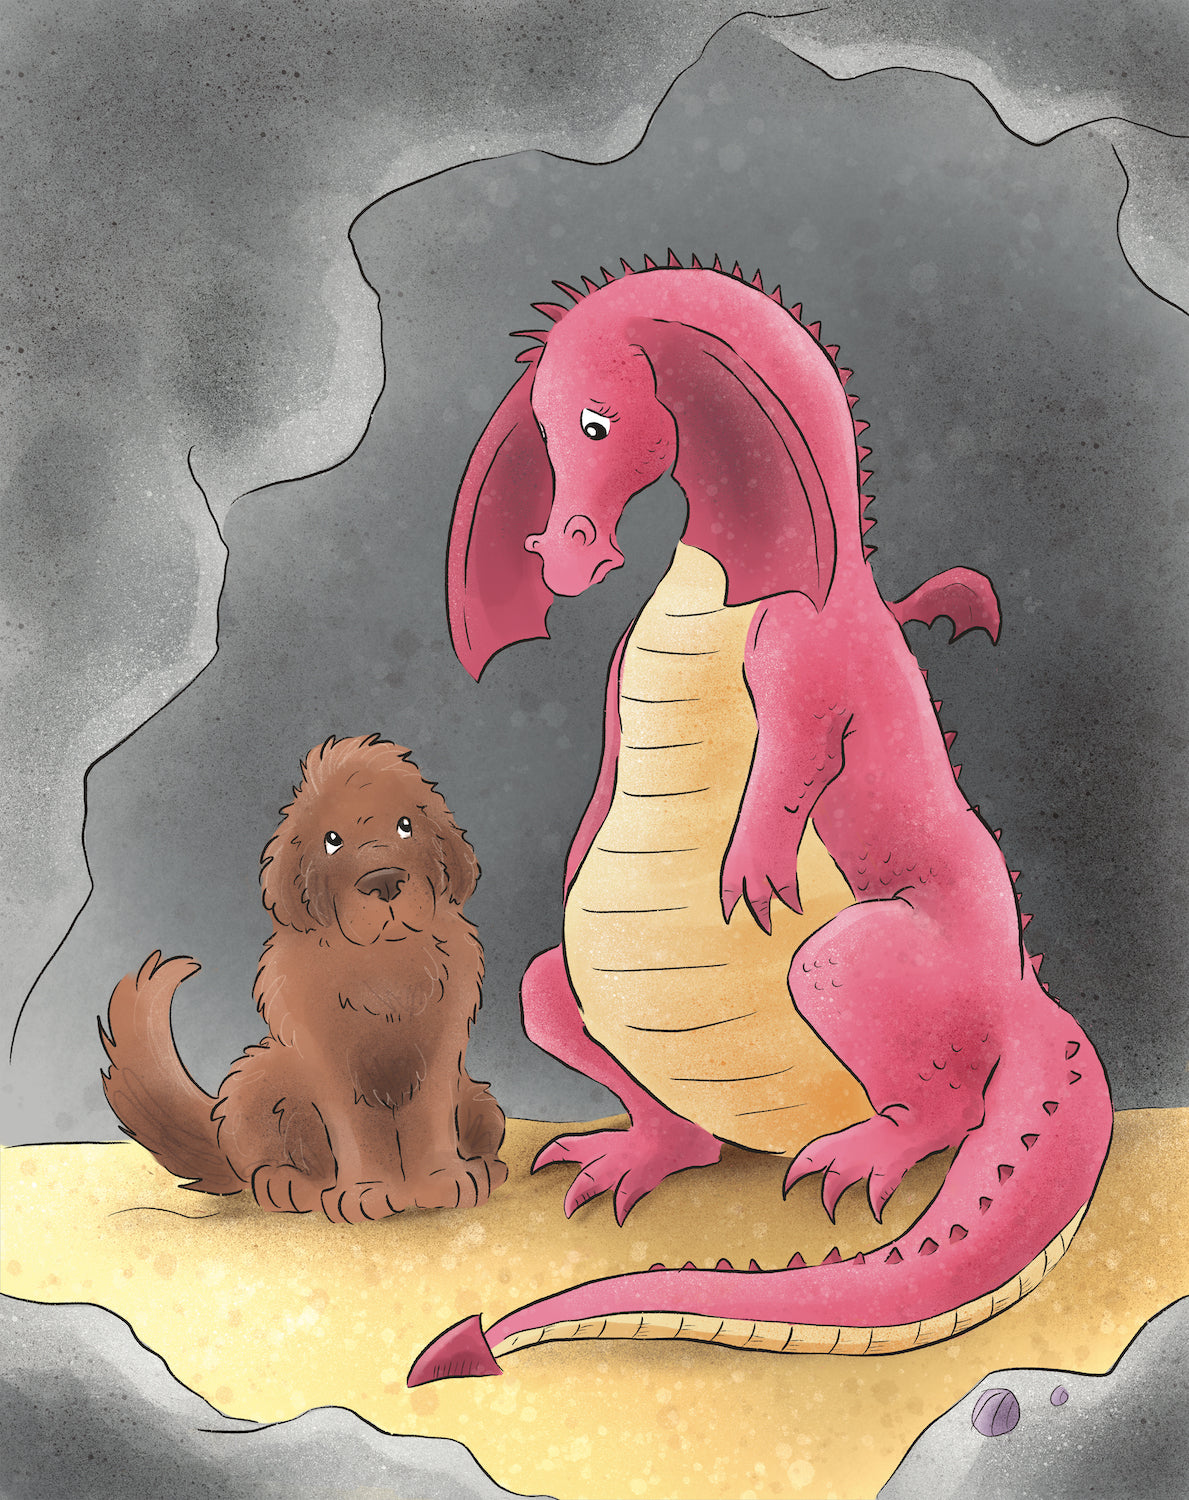 Monty and the Poppit Dragon